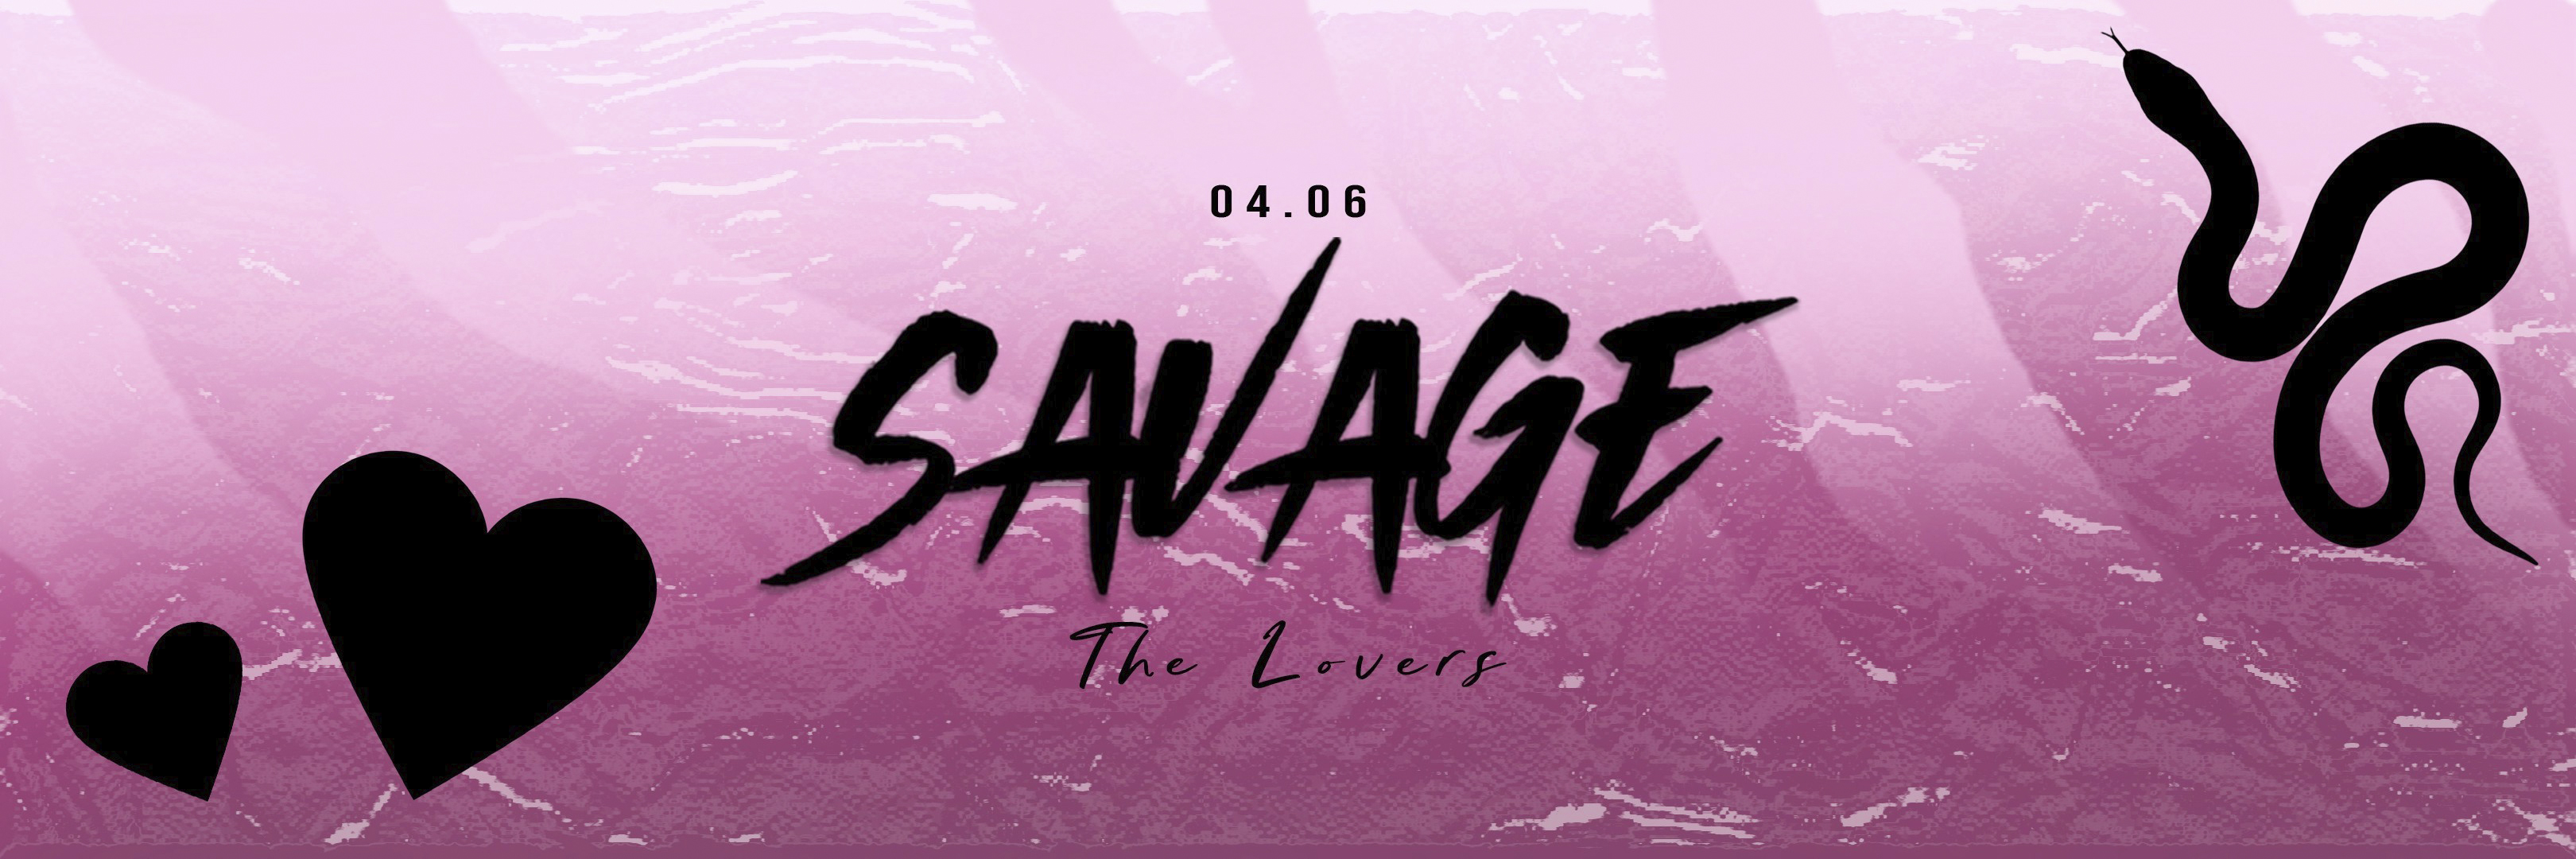 SAVAGE 04.06 - THE LOVERS 